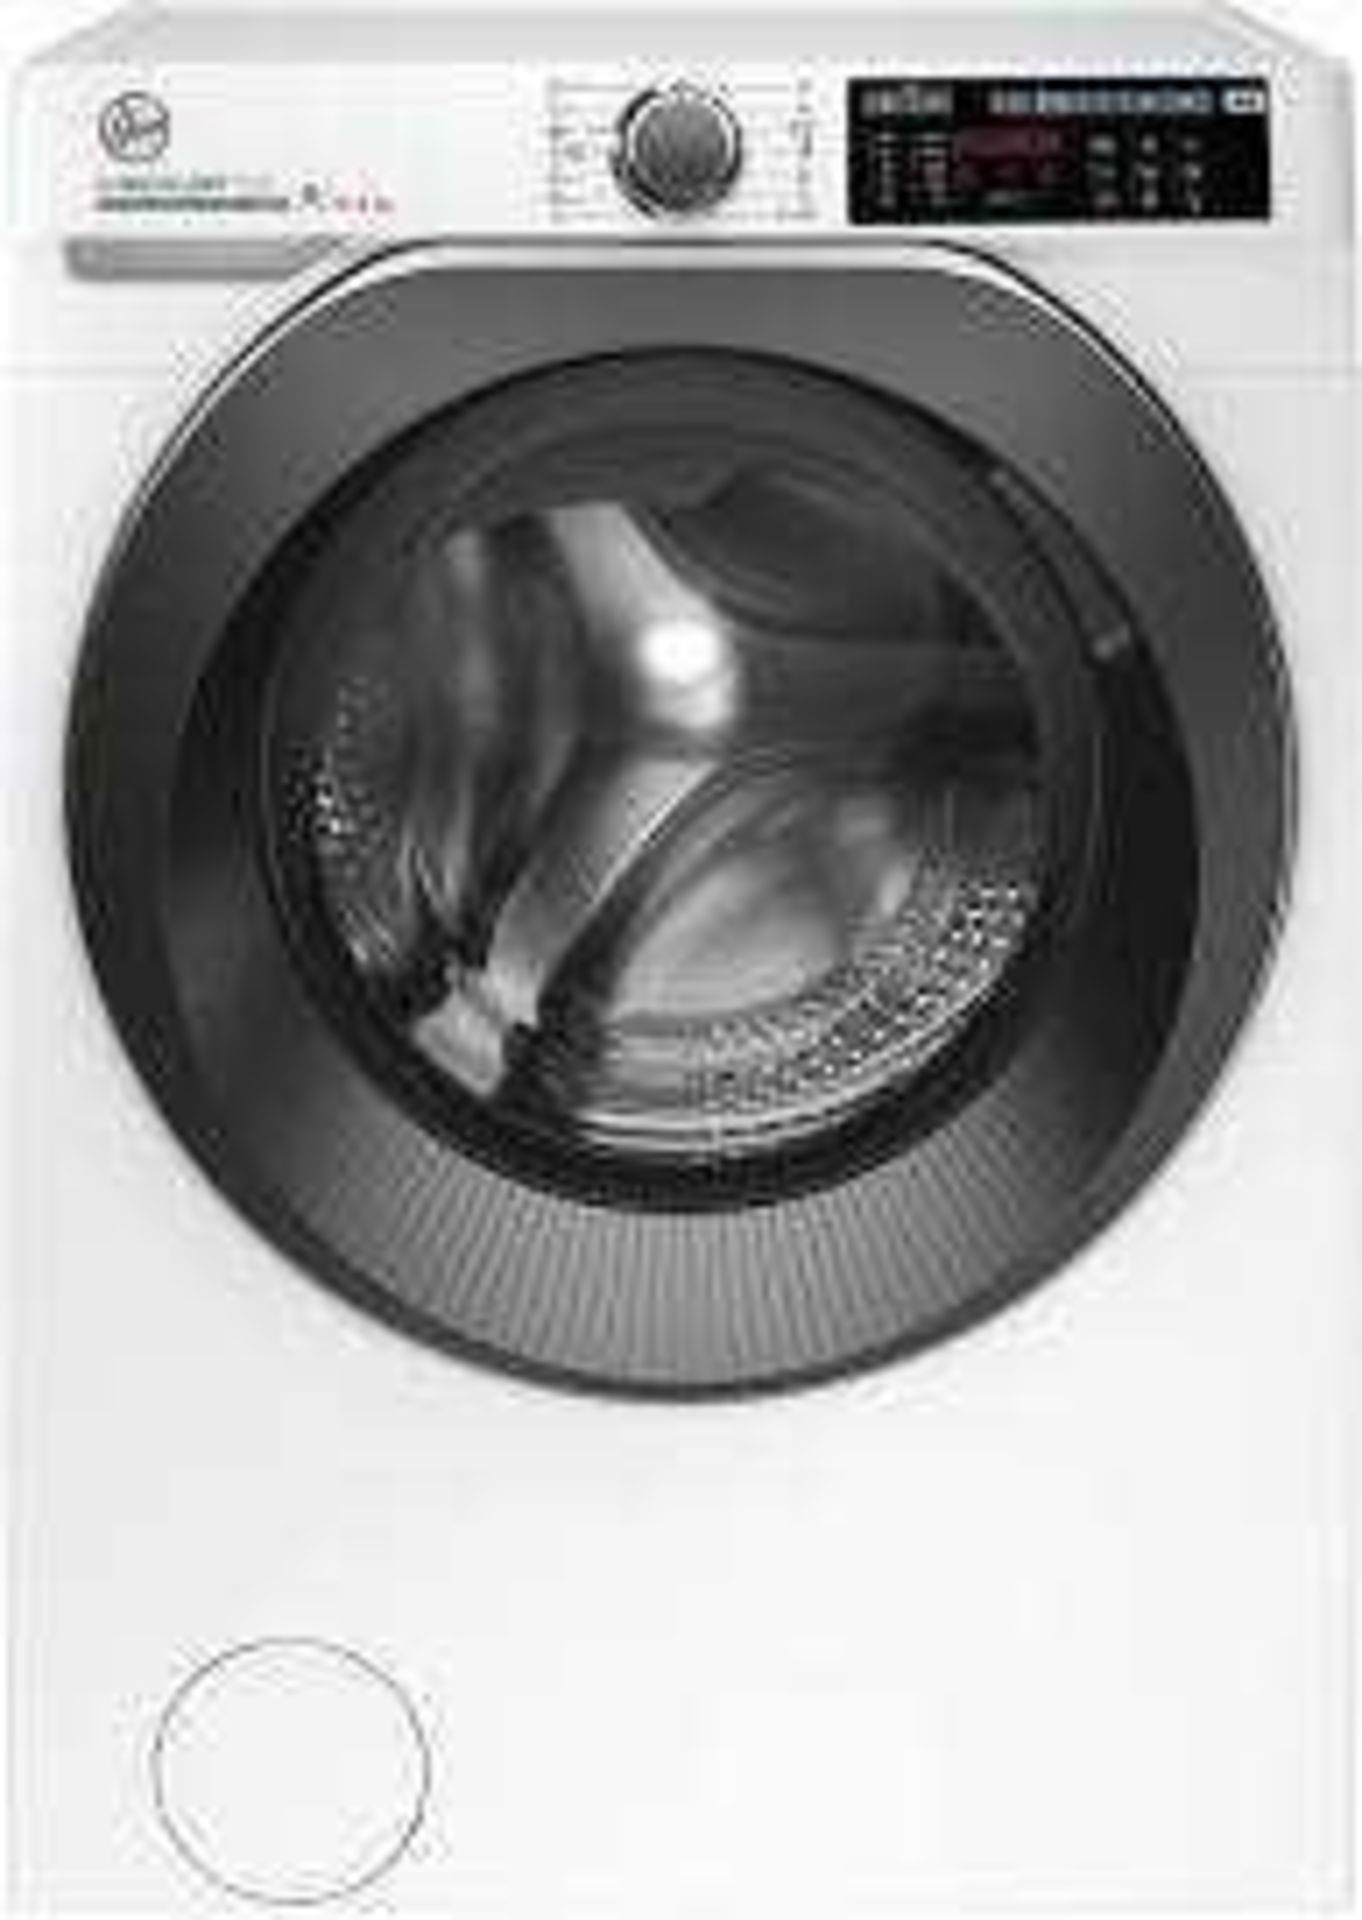 RRP £530 Wrapped Hoover Hdd 4106Ambc-80 H-Wash&Dry 500 10+6Kg Washer/Dryer